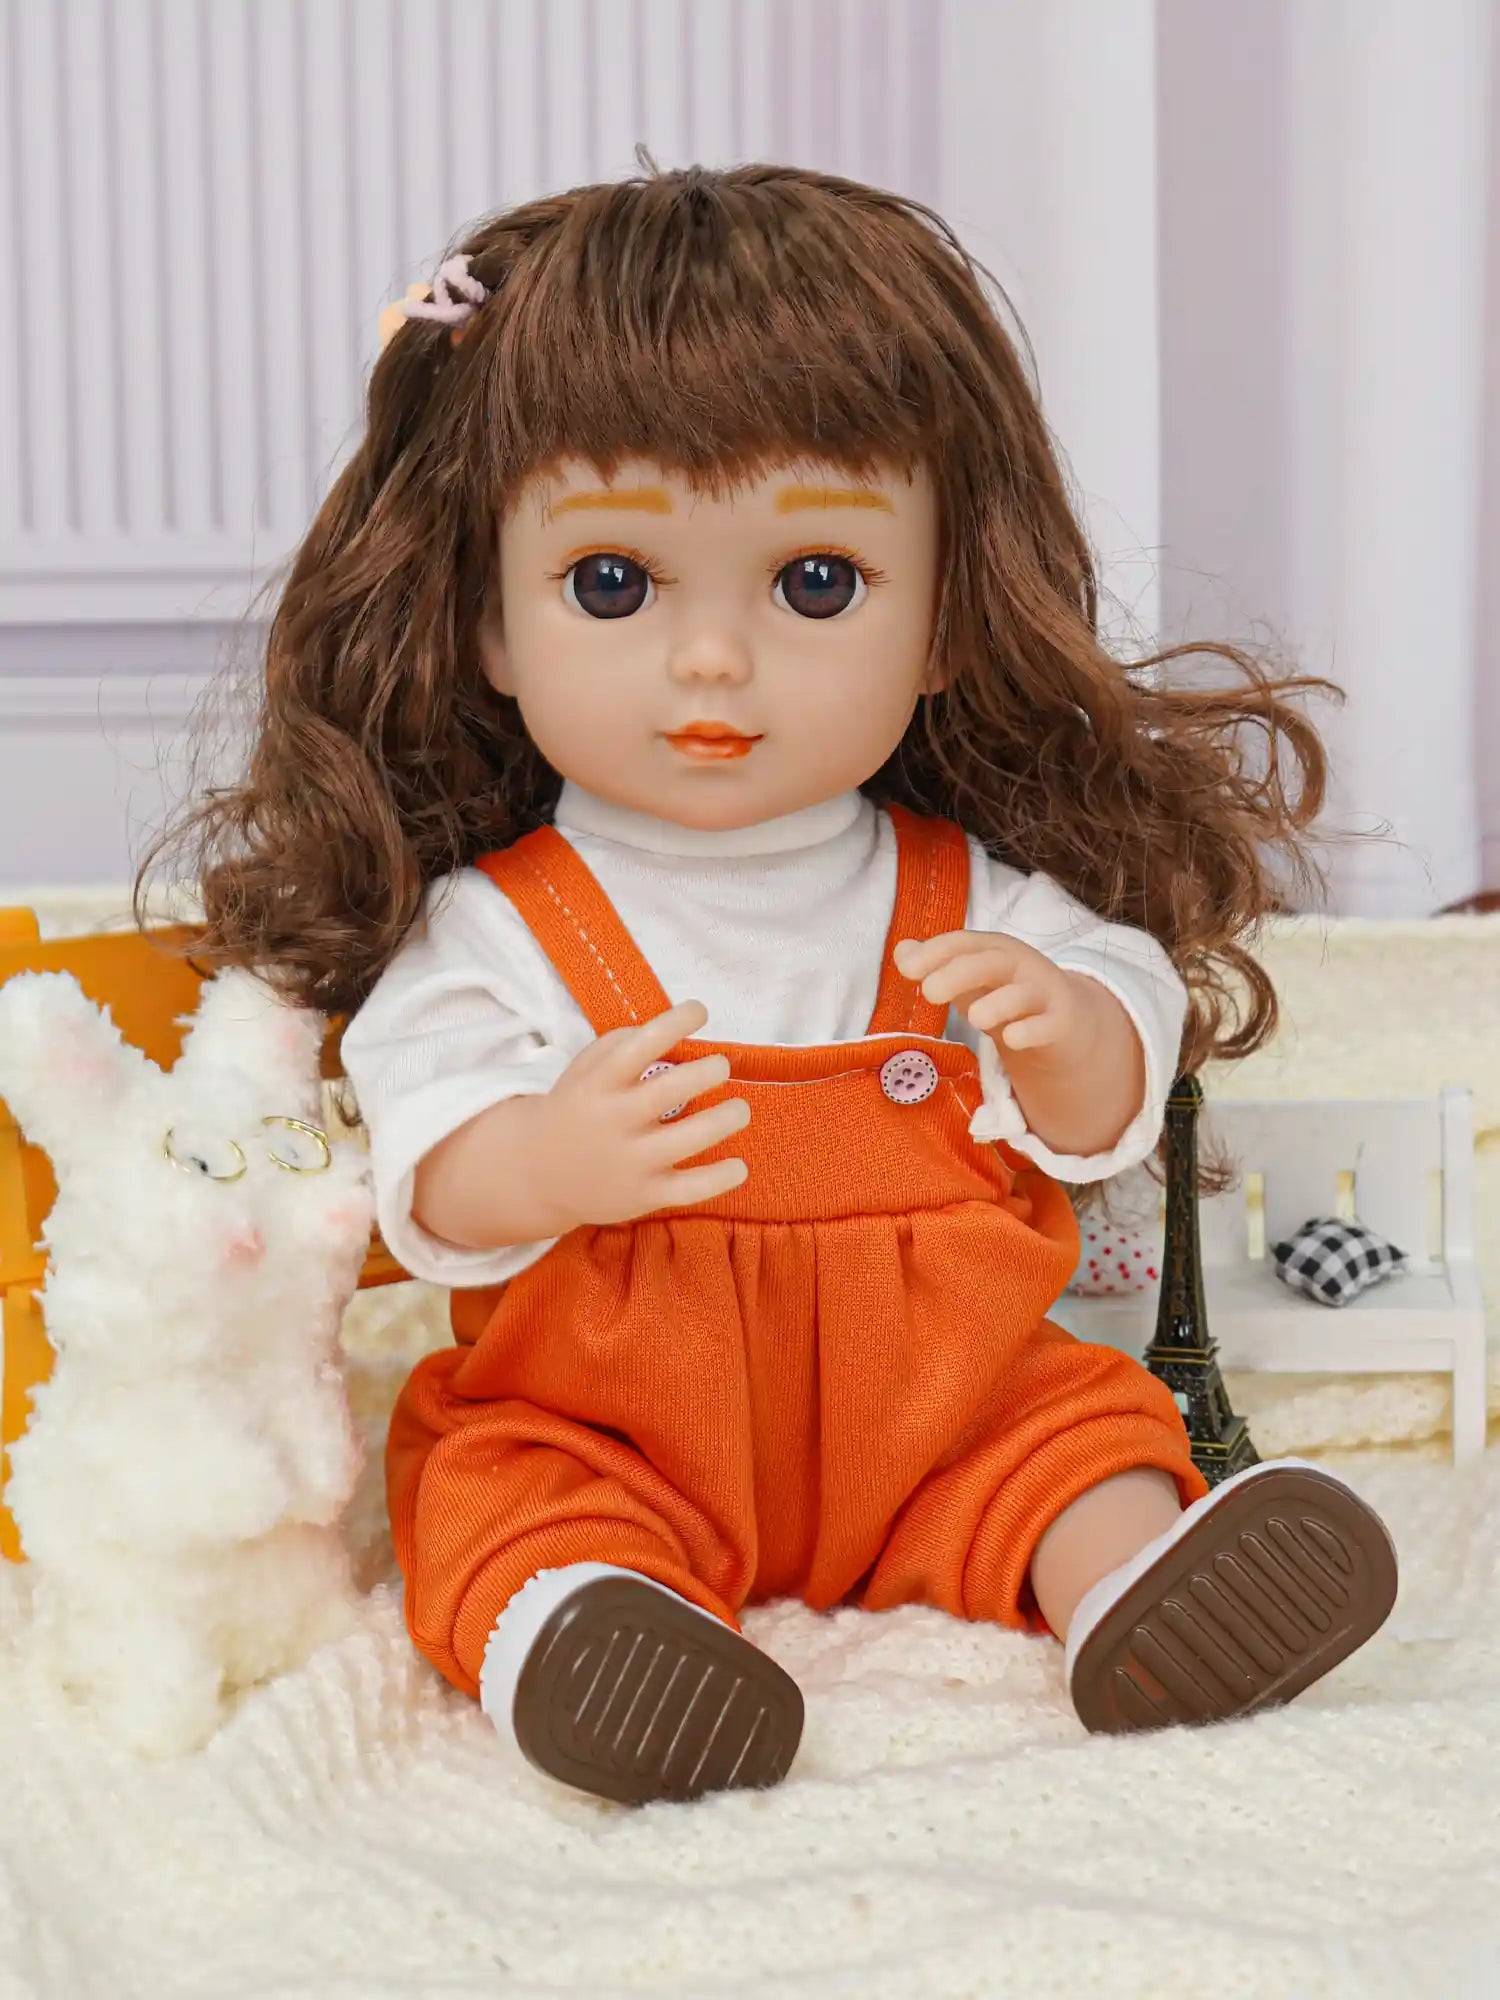 Doll with wavy hair and playful expression, next to a fluffy toy dog and a small Eiffel Tower.